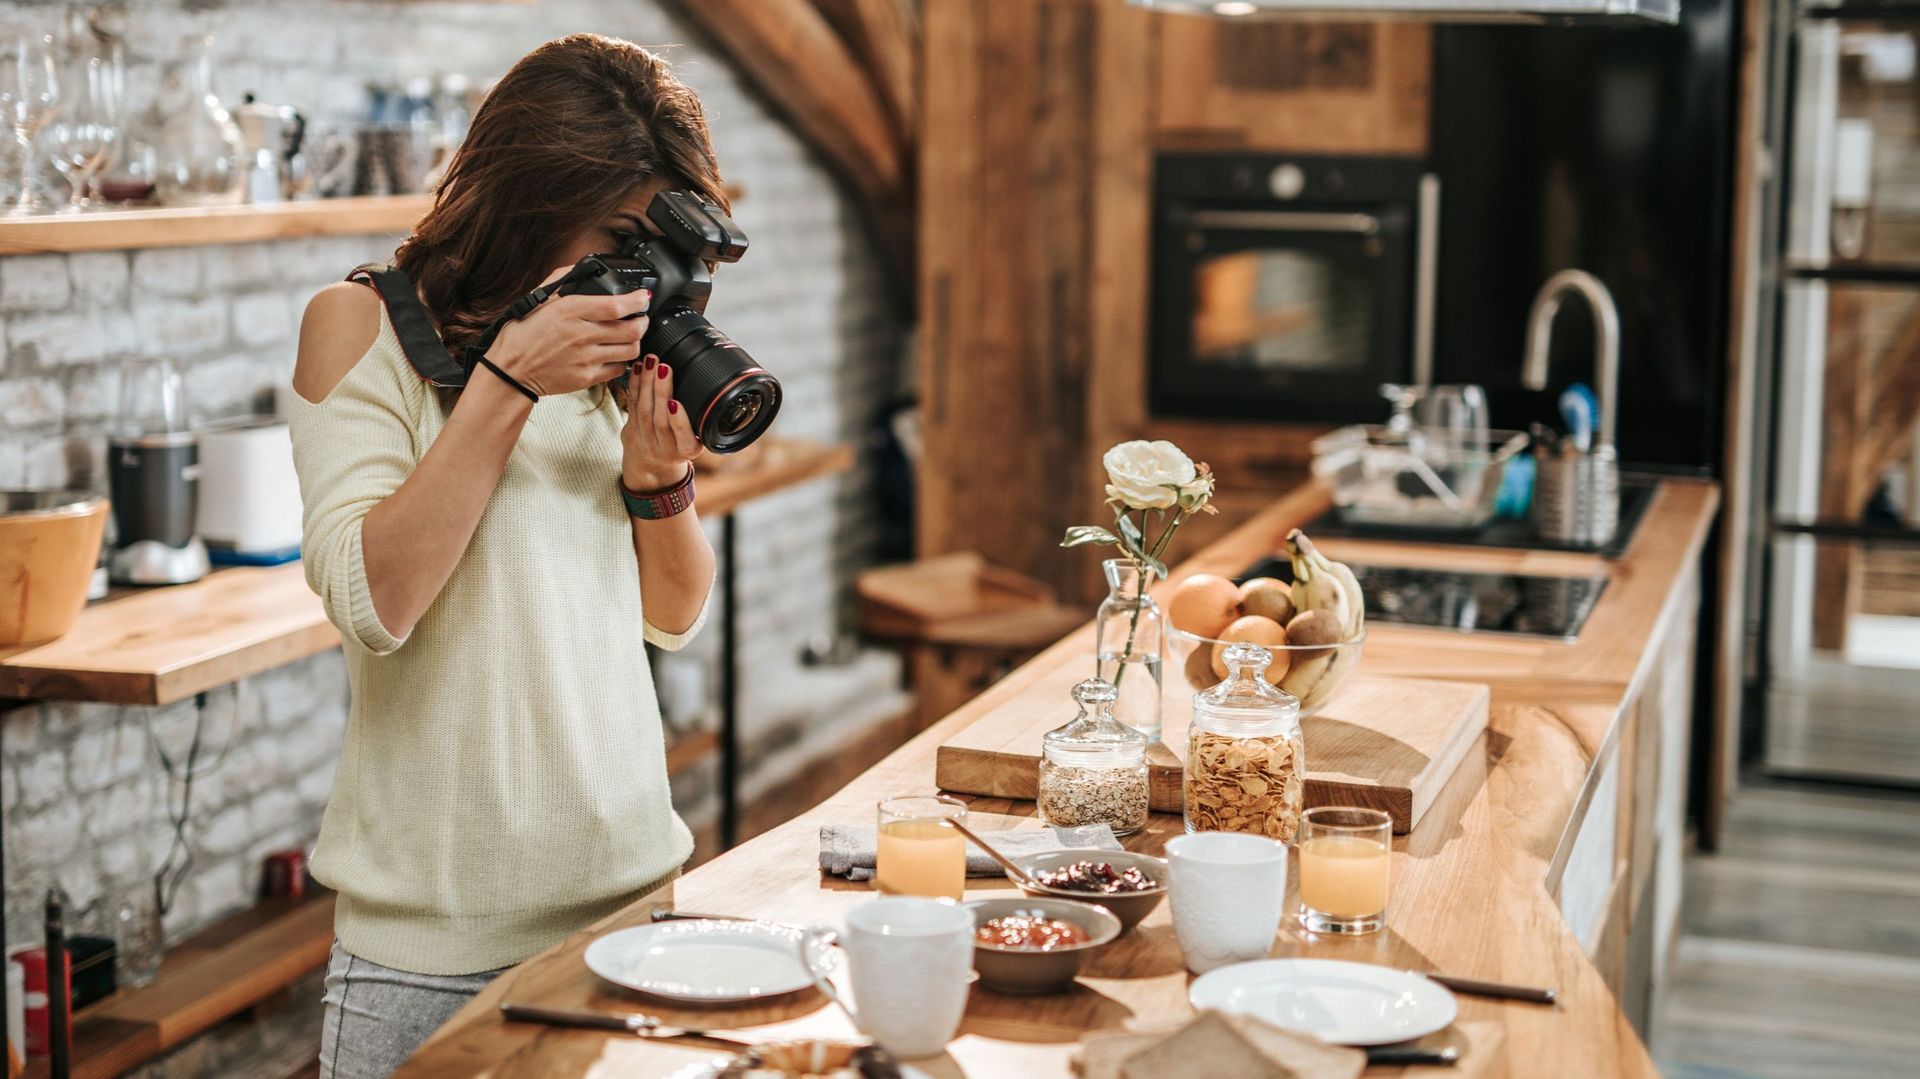 Female photographer taking photos of food at dining table.